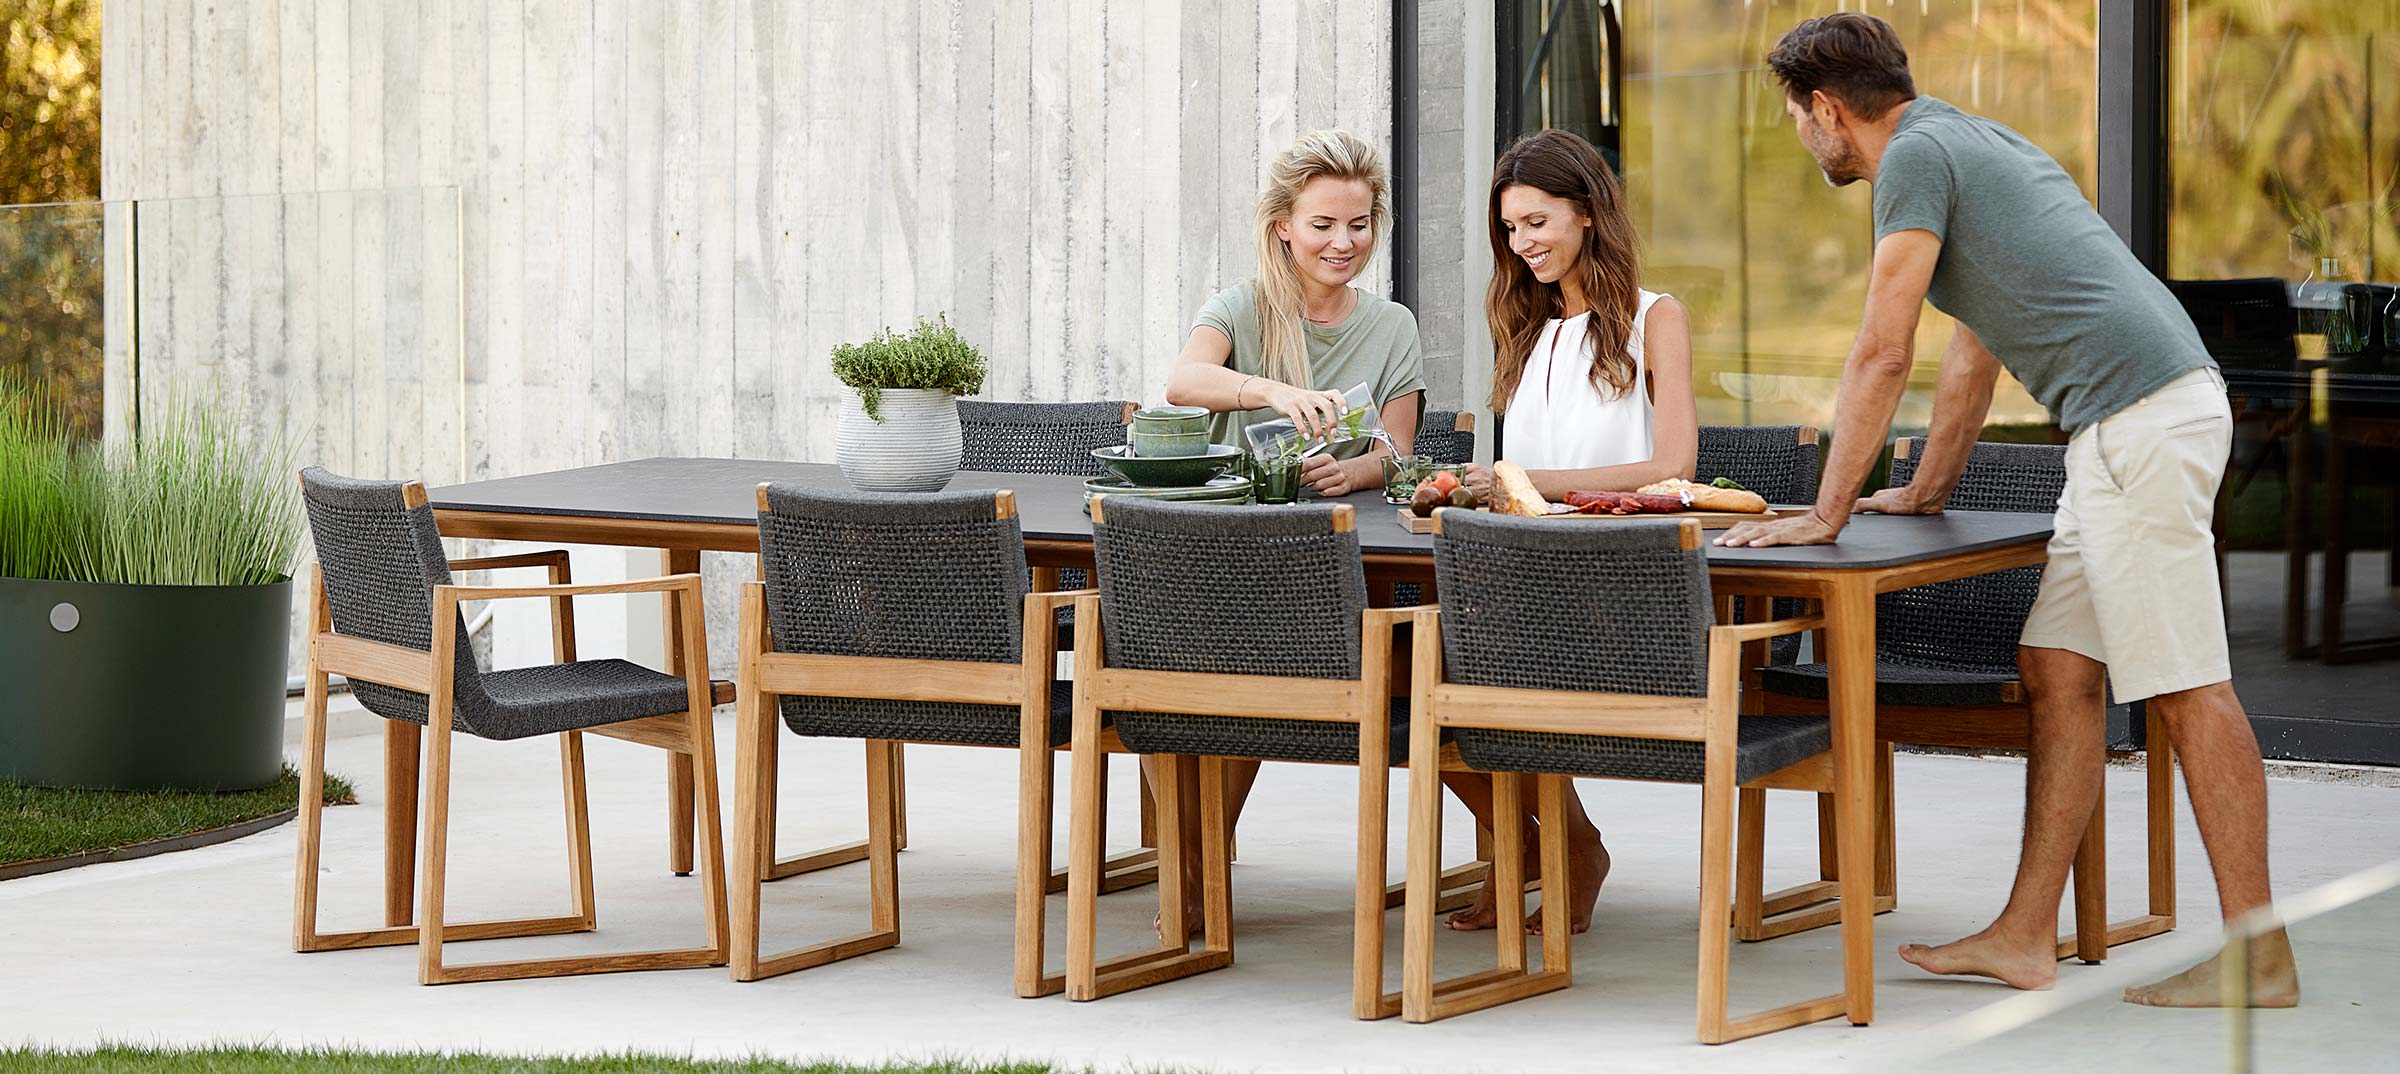 Papillon Interiors Outdoor Dining Chairs